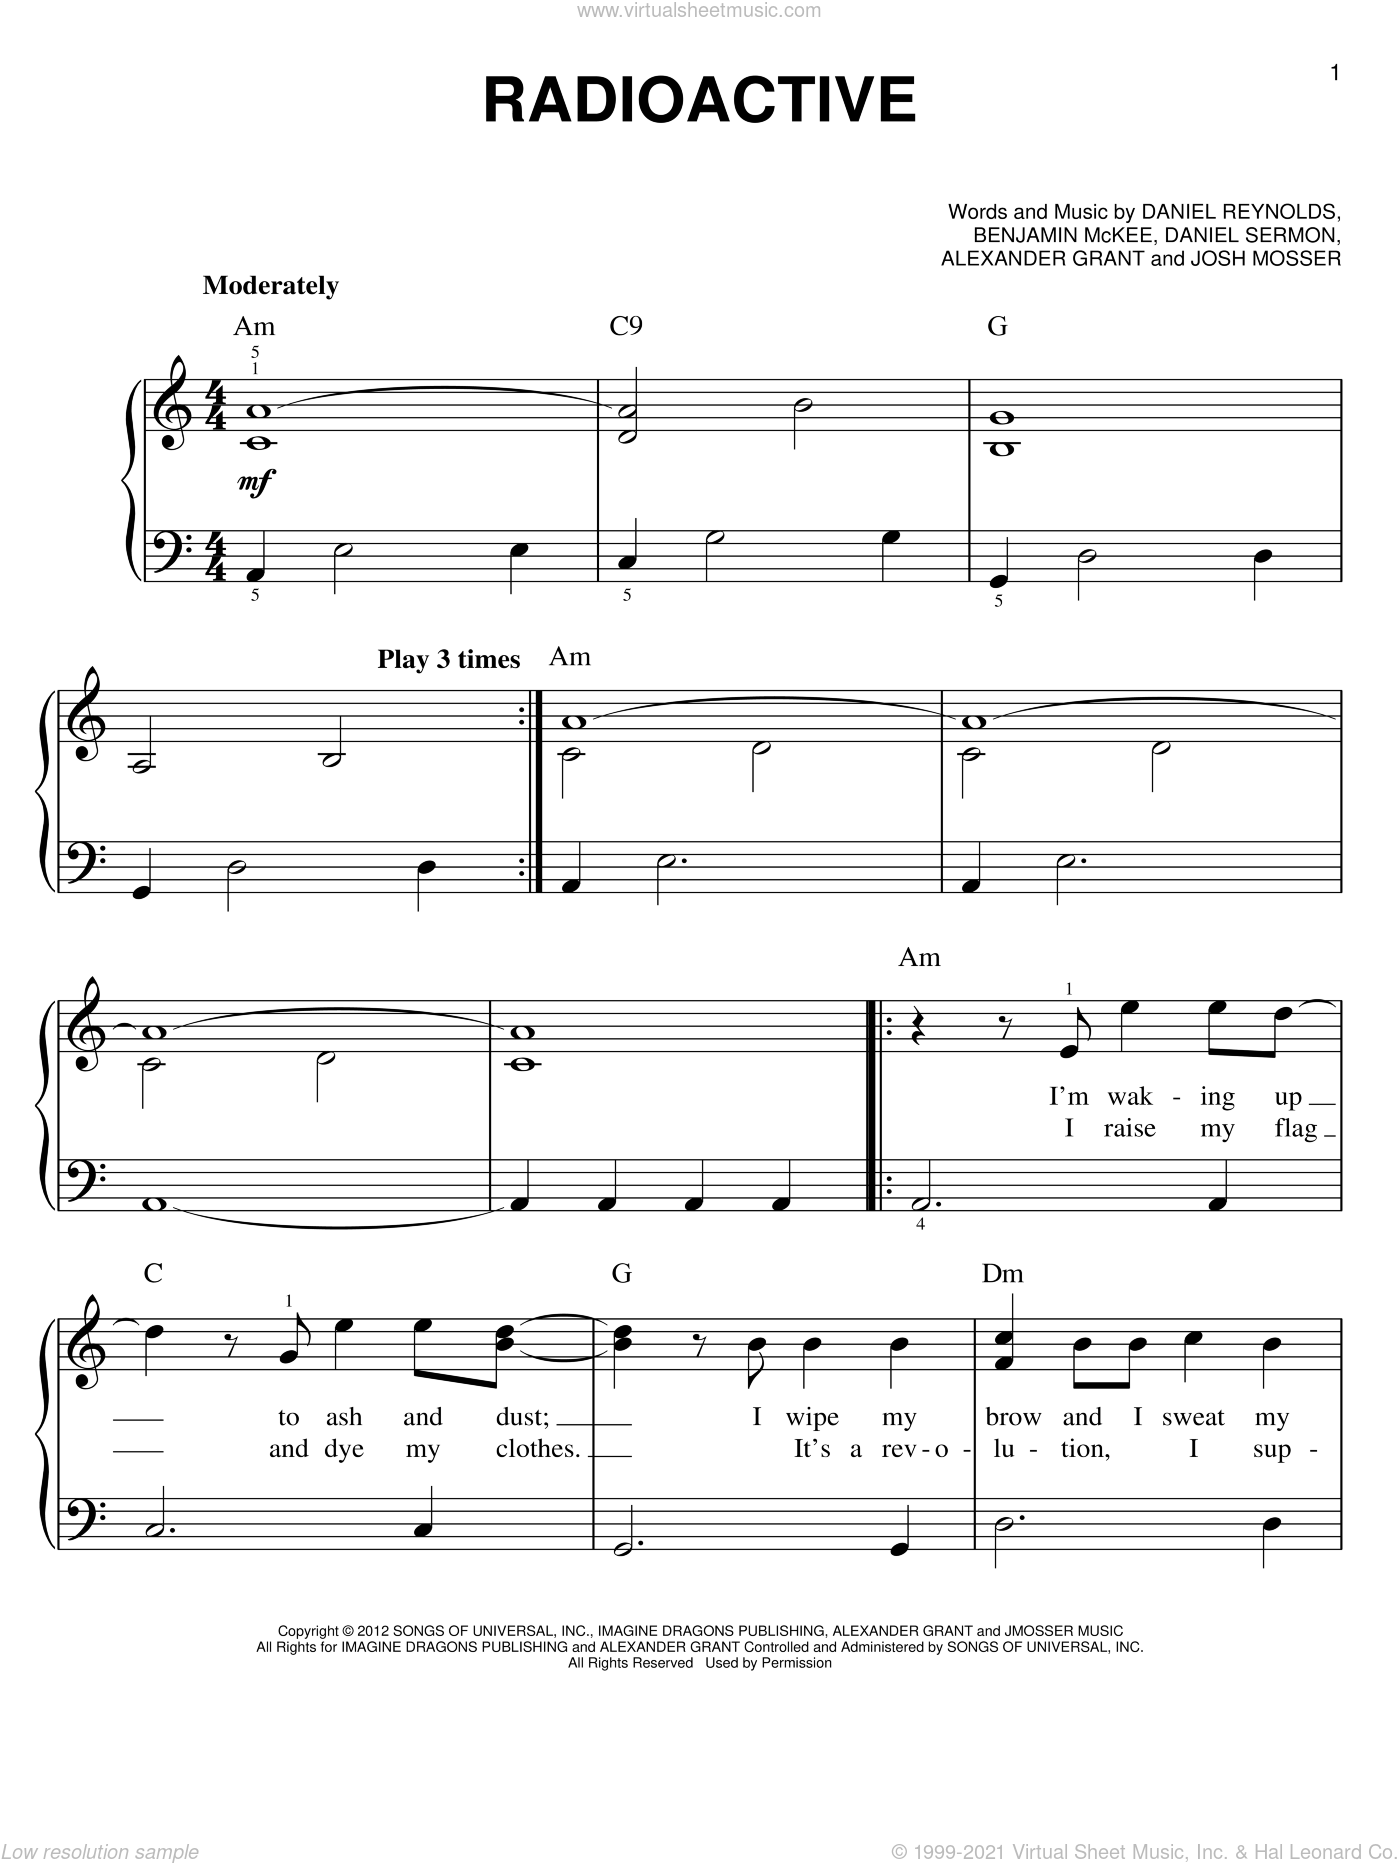 Dragons Radioactive Easy Sheet Music For Piano Solo Pdf - how to sing the piano in roblox song believer